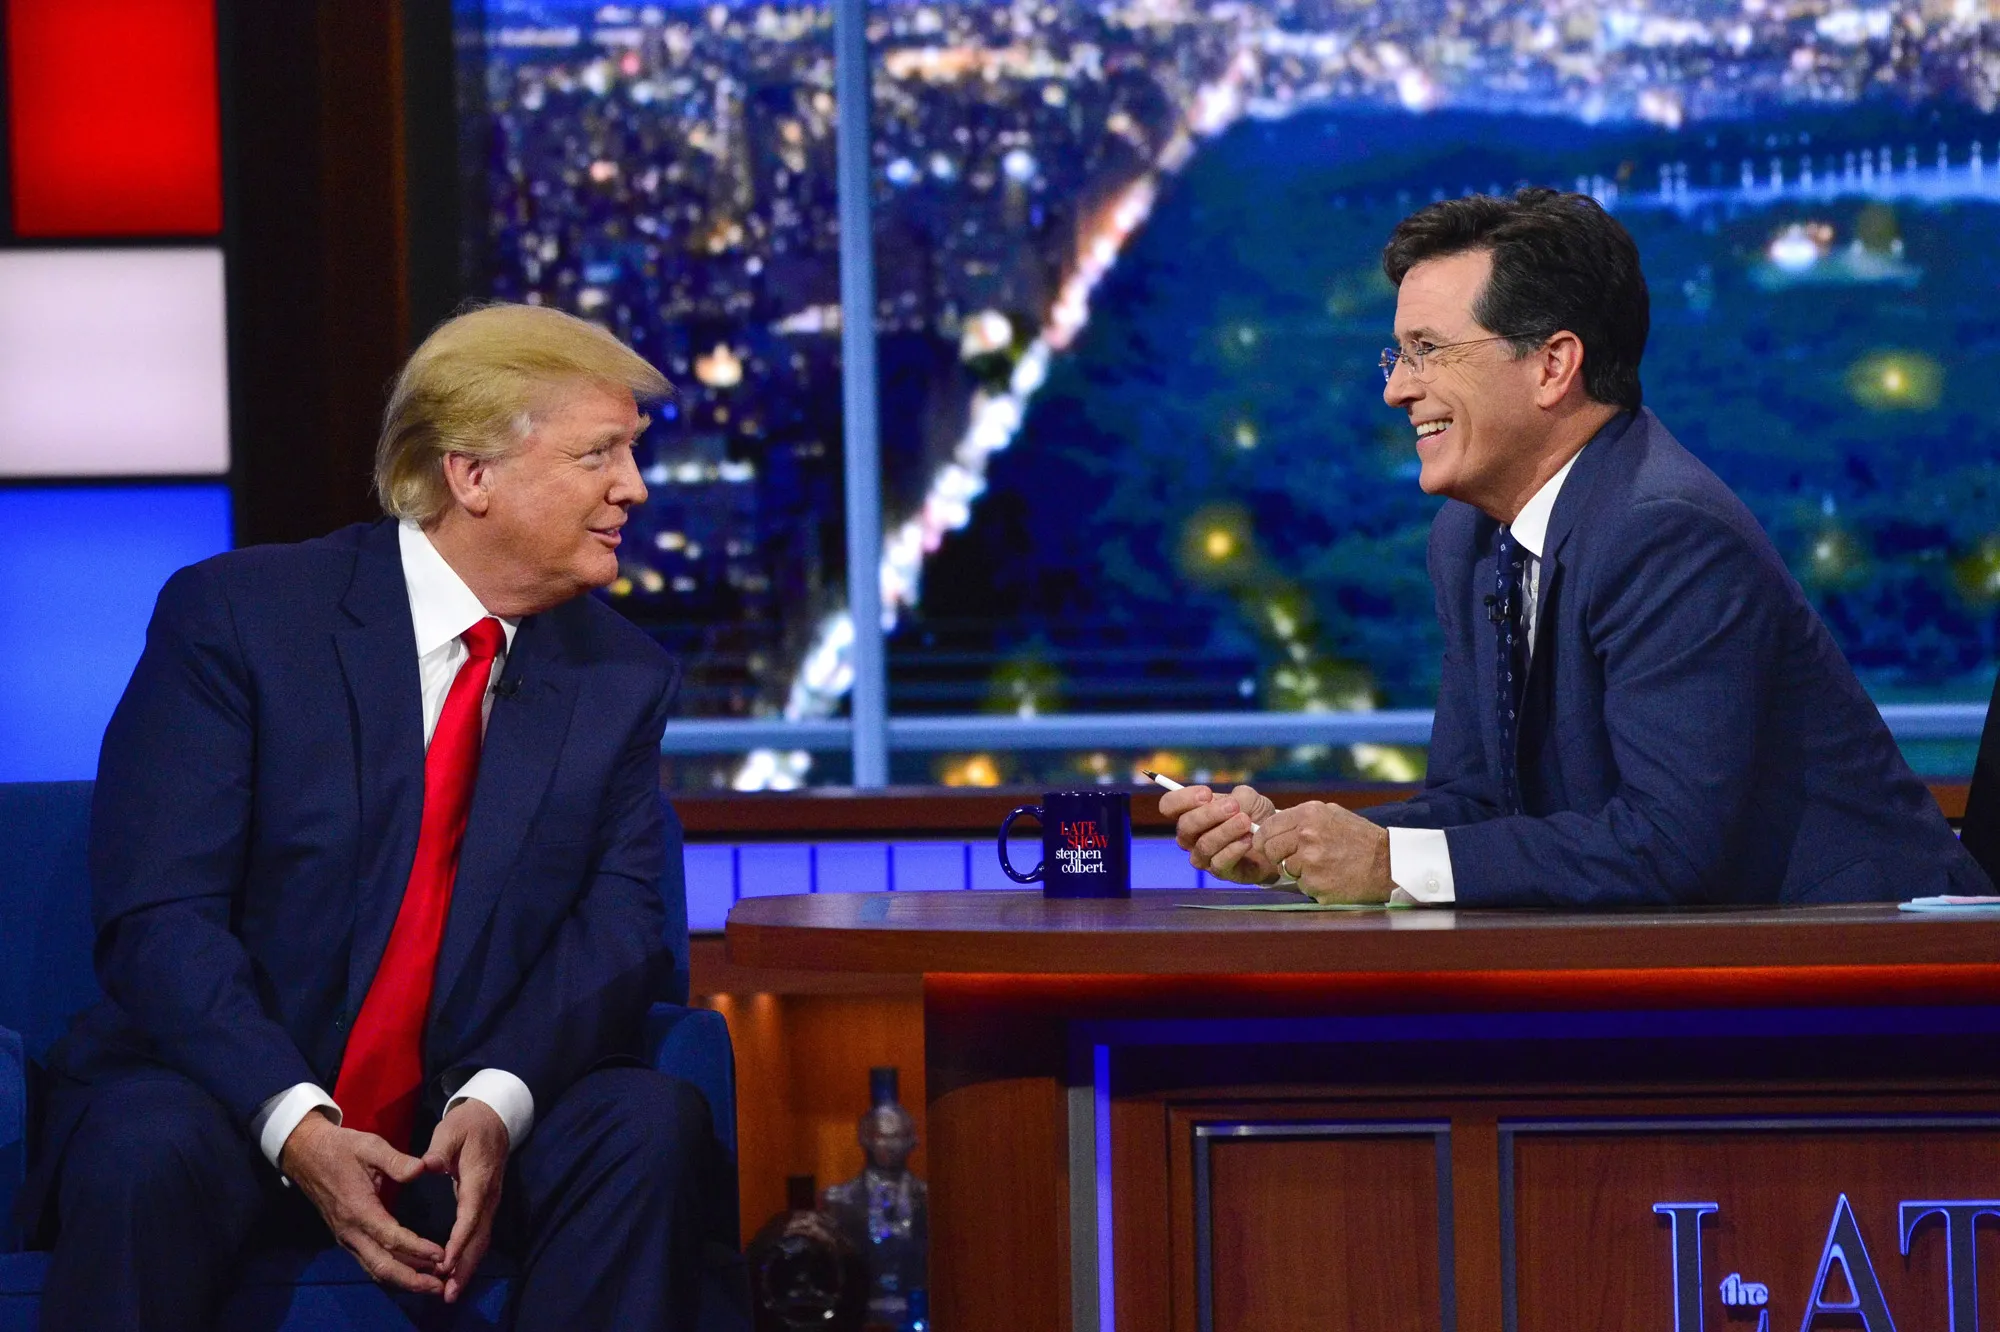 Stephen Colbert interviews Donald Trump in The Late Show